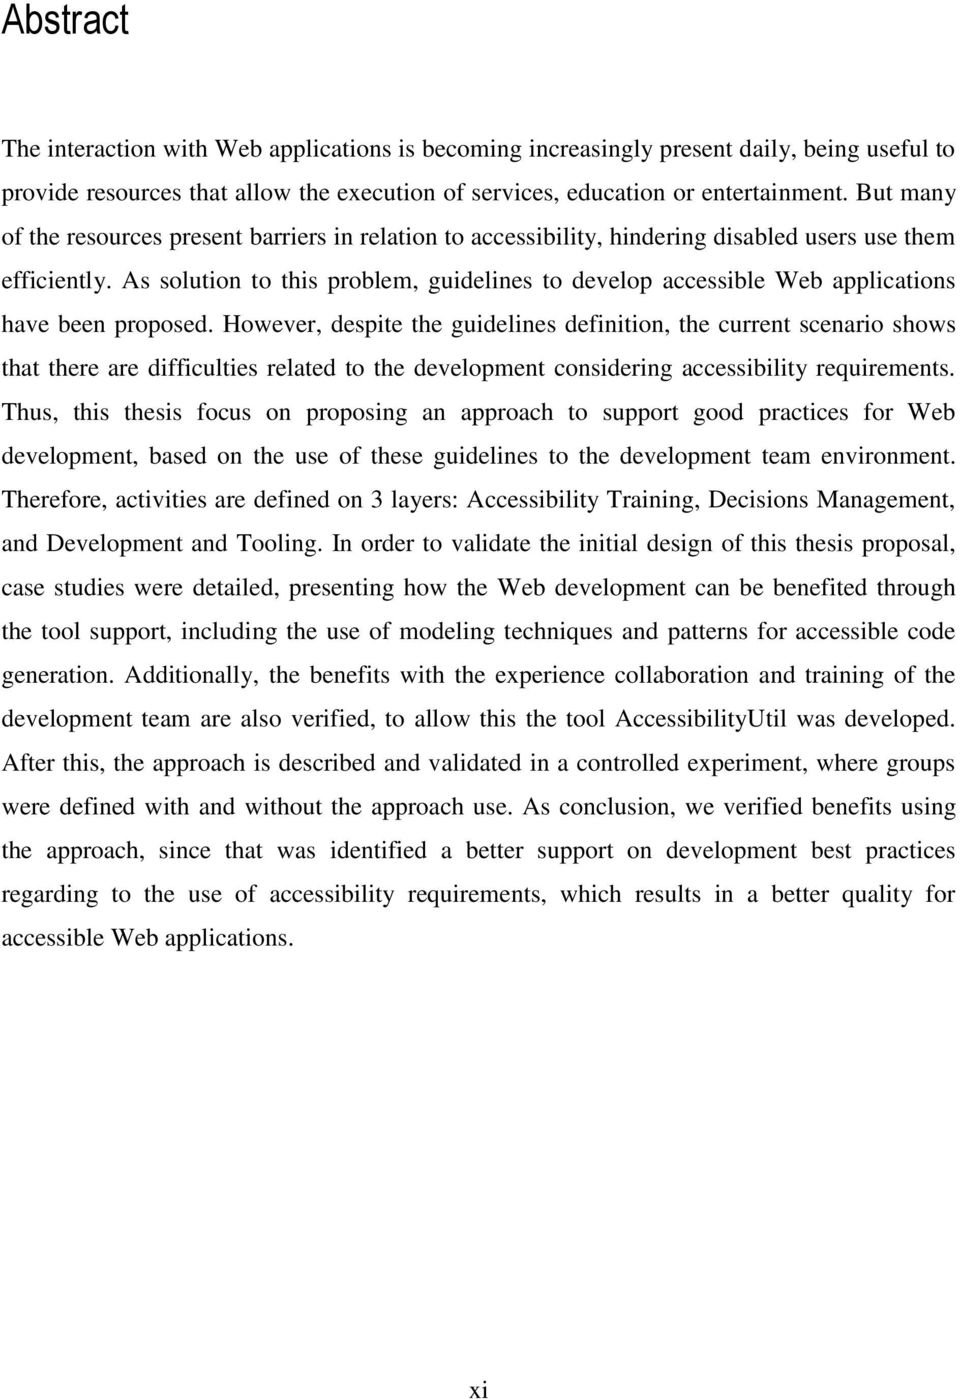 As solution to this problem, guidelines to develop accessible Web applications have been proposed.